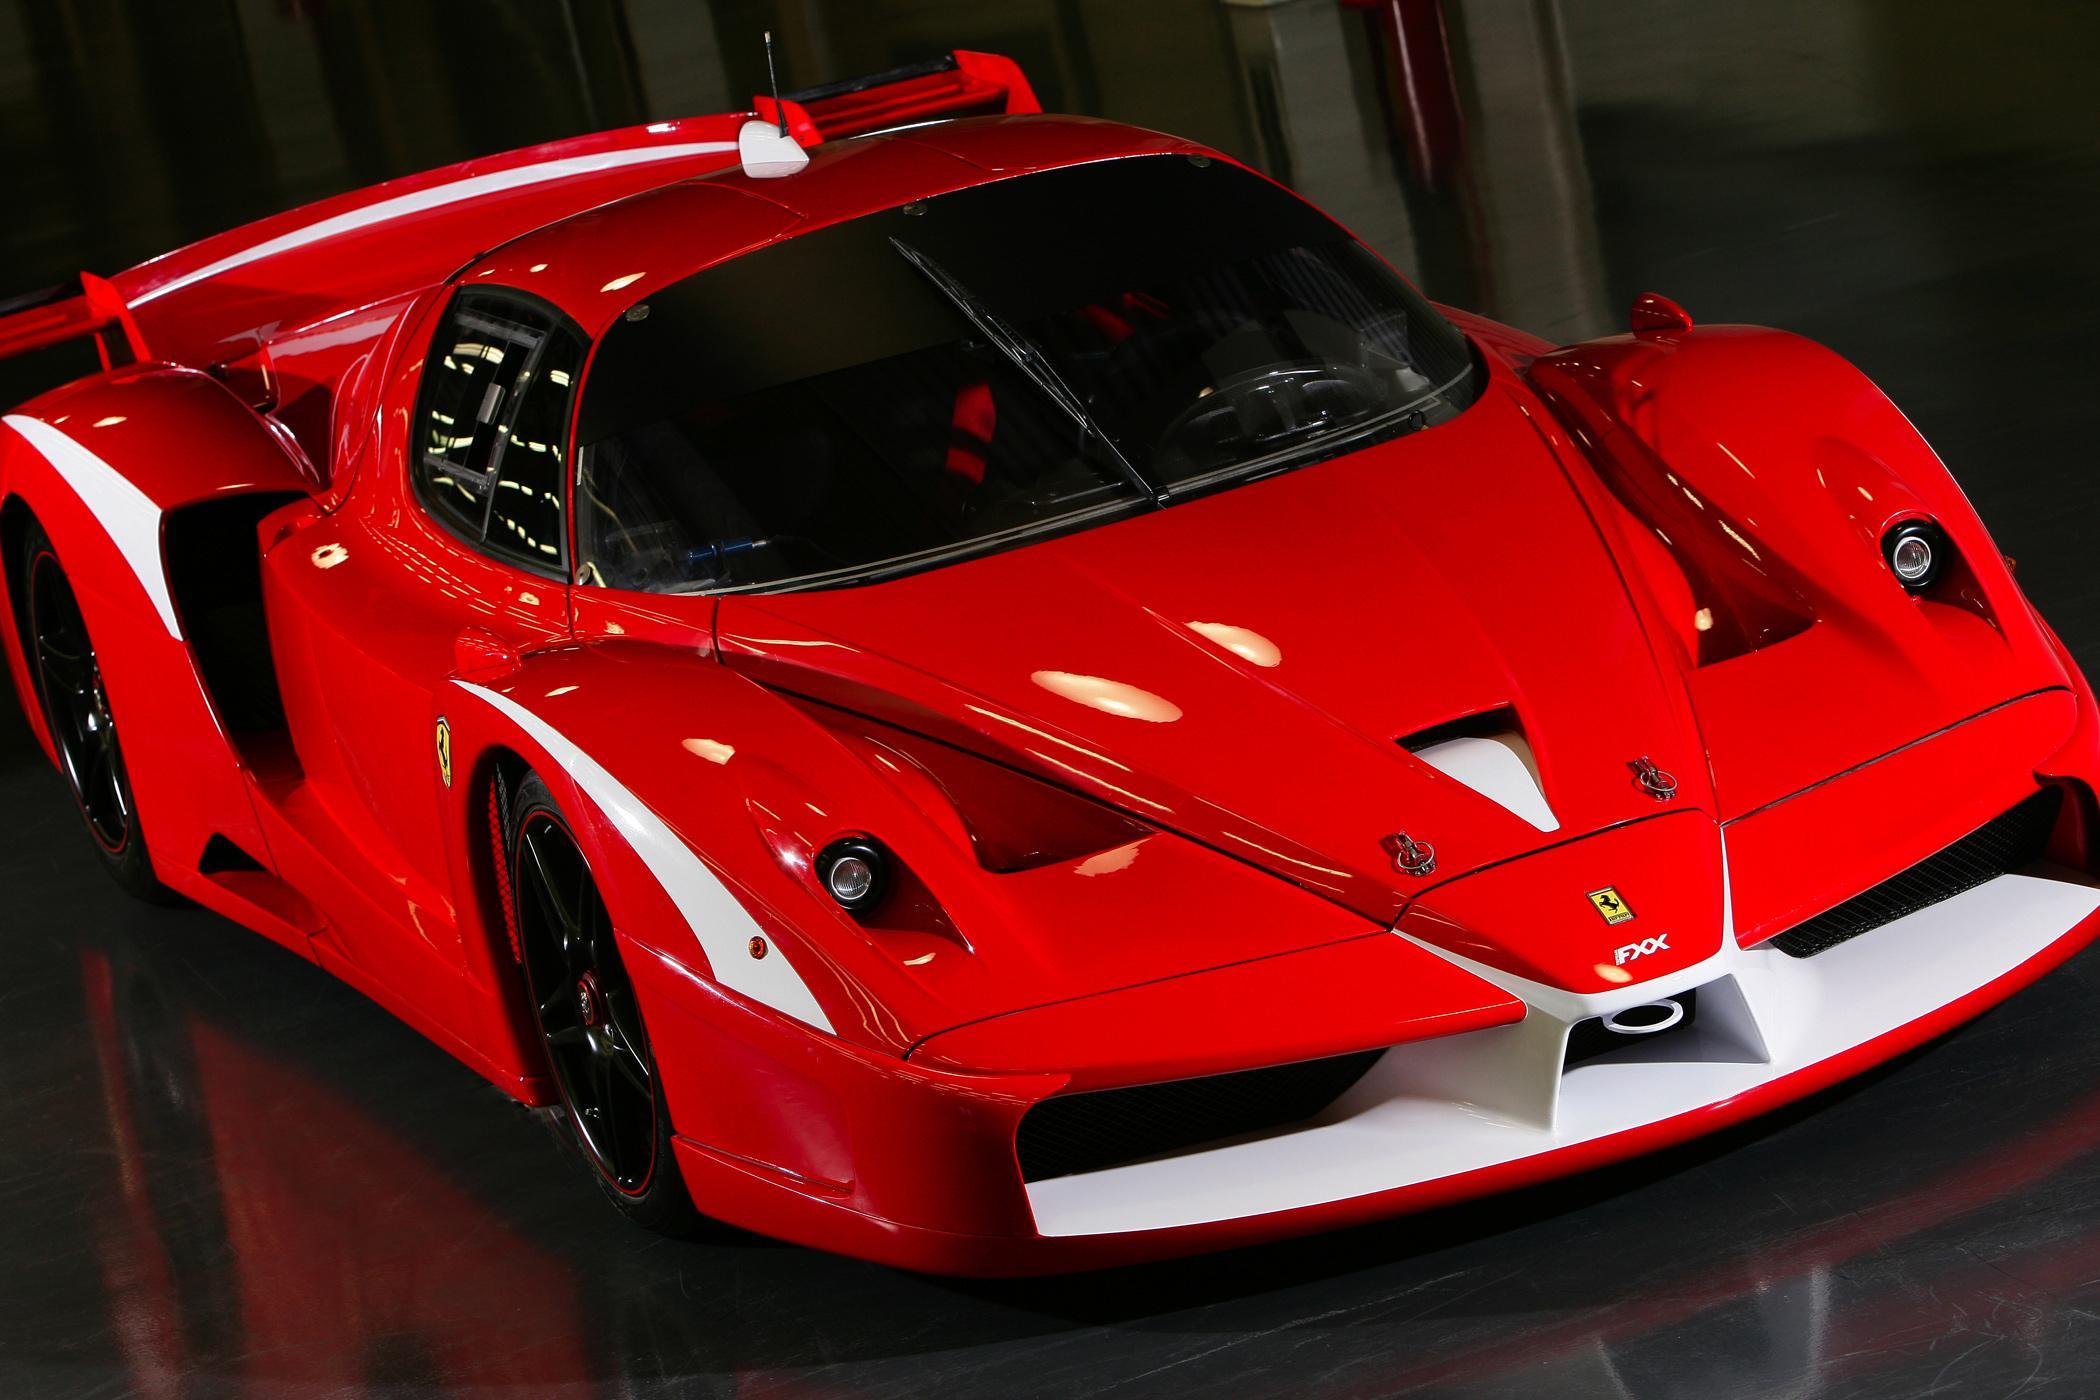 Ferrari FXX Evolution Package Pictures, Photos, Wallpapers